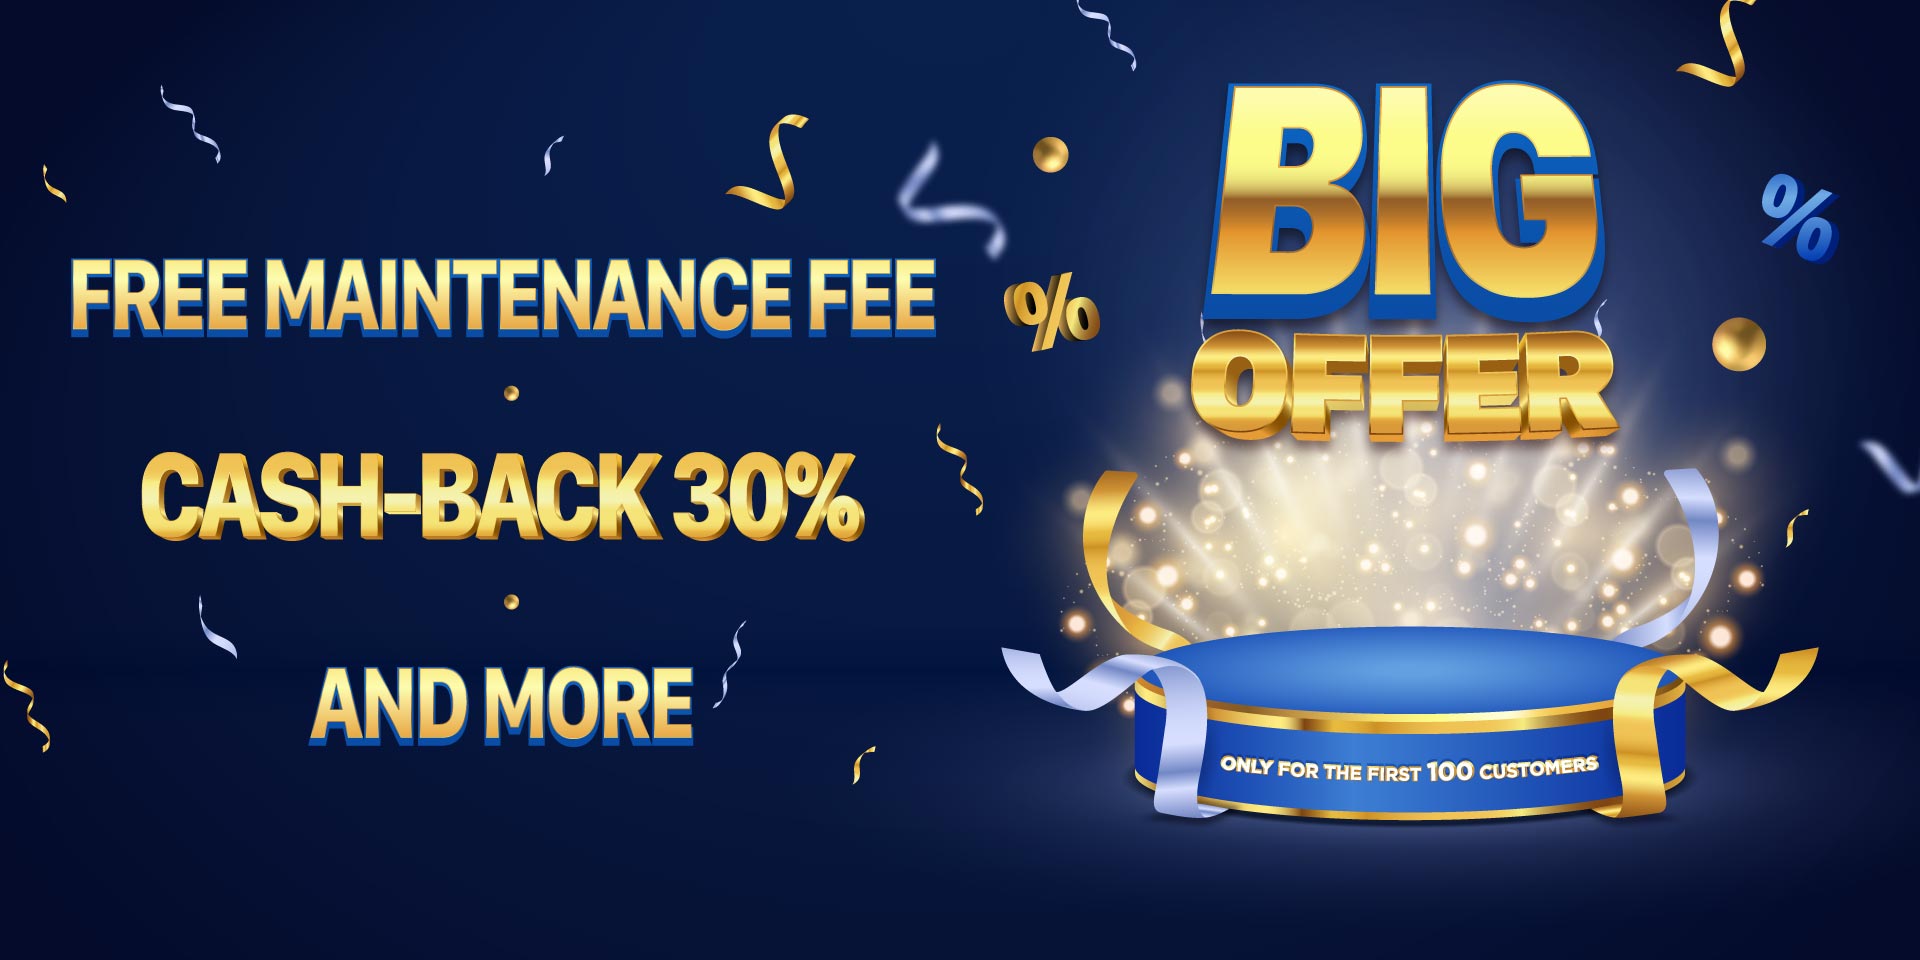 Welcome to a big offer from DNBC